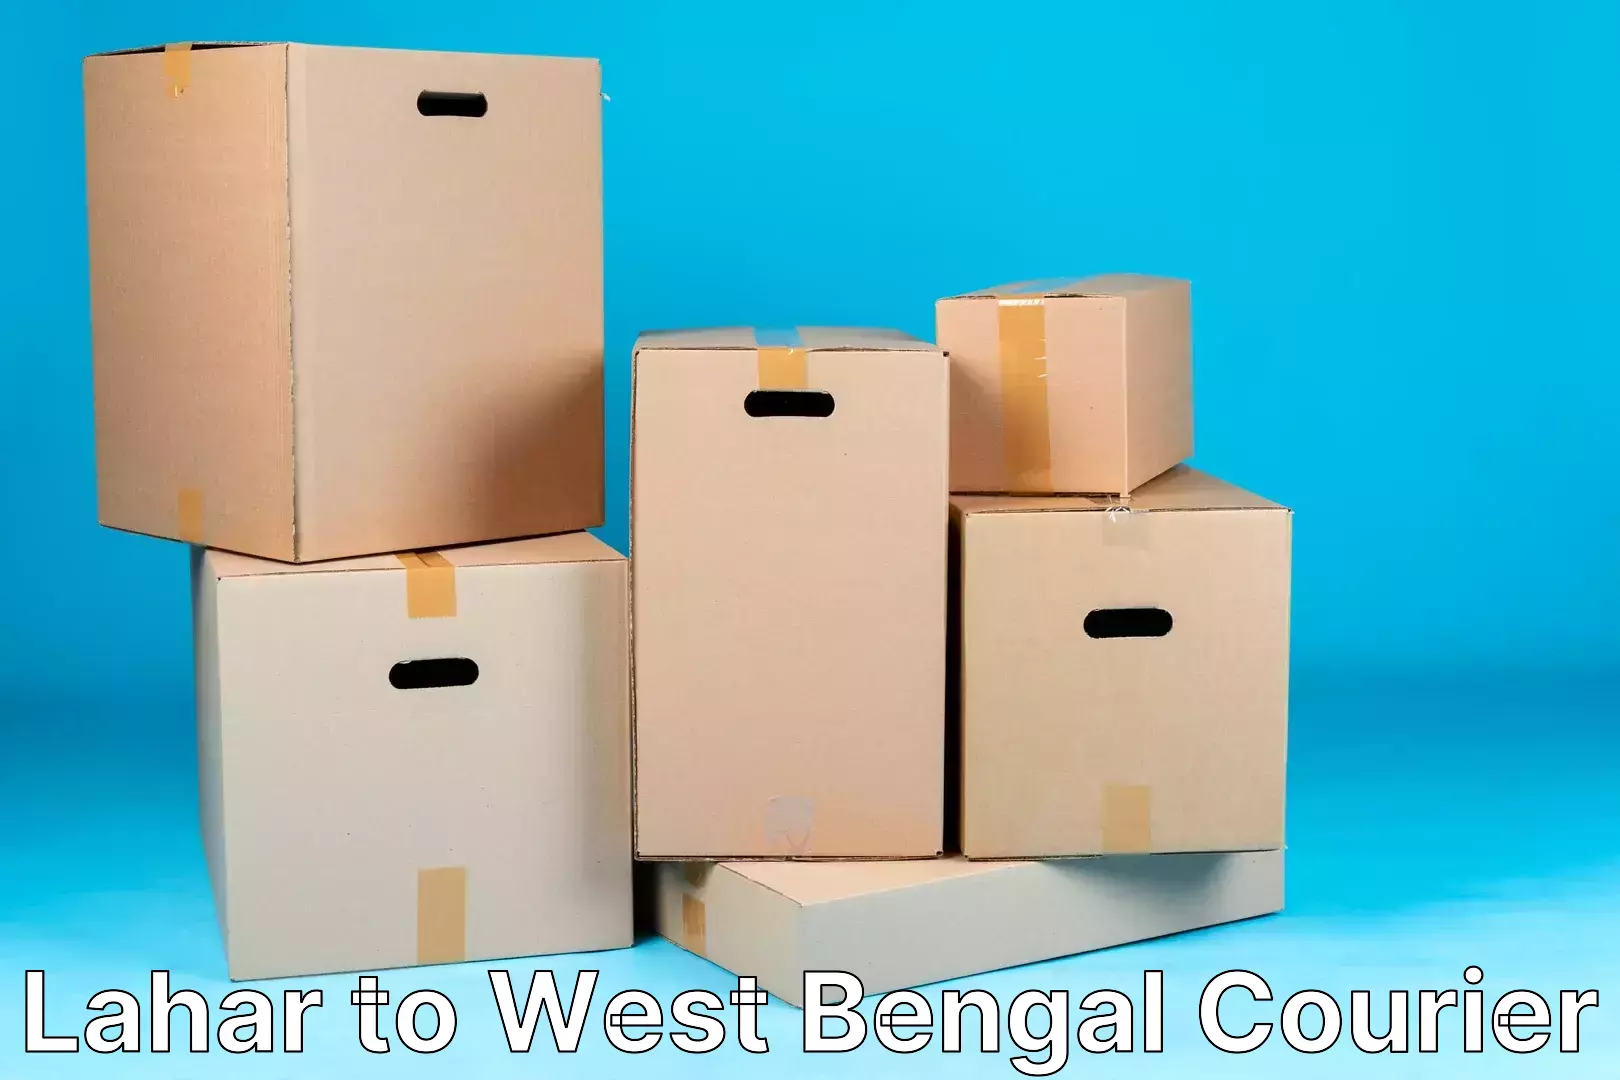 Simplified shipping solutions Lahar to West Bengal